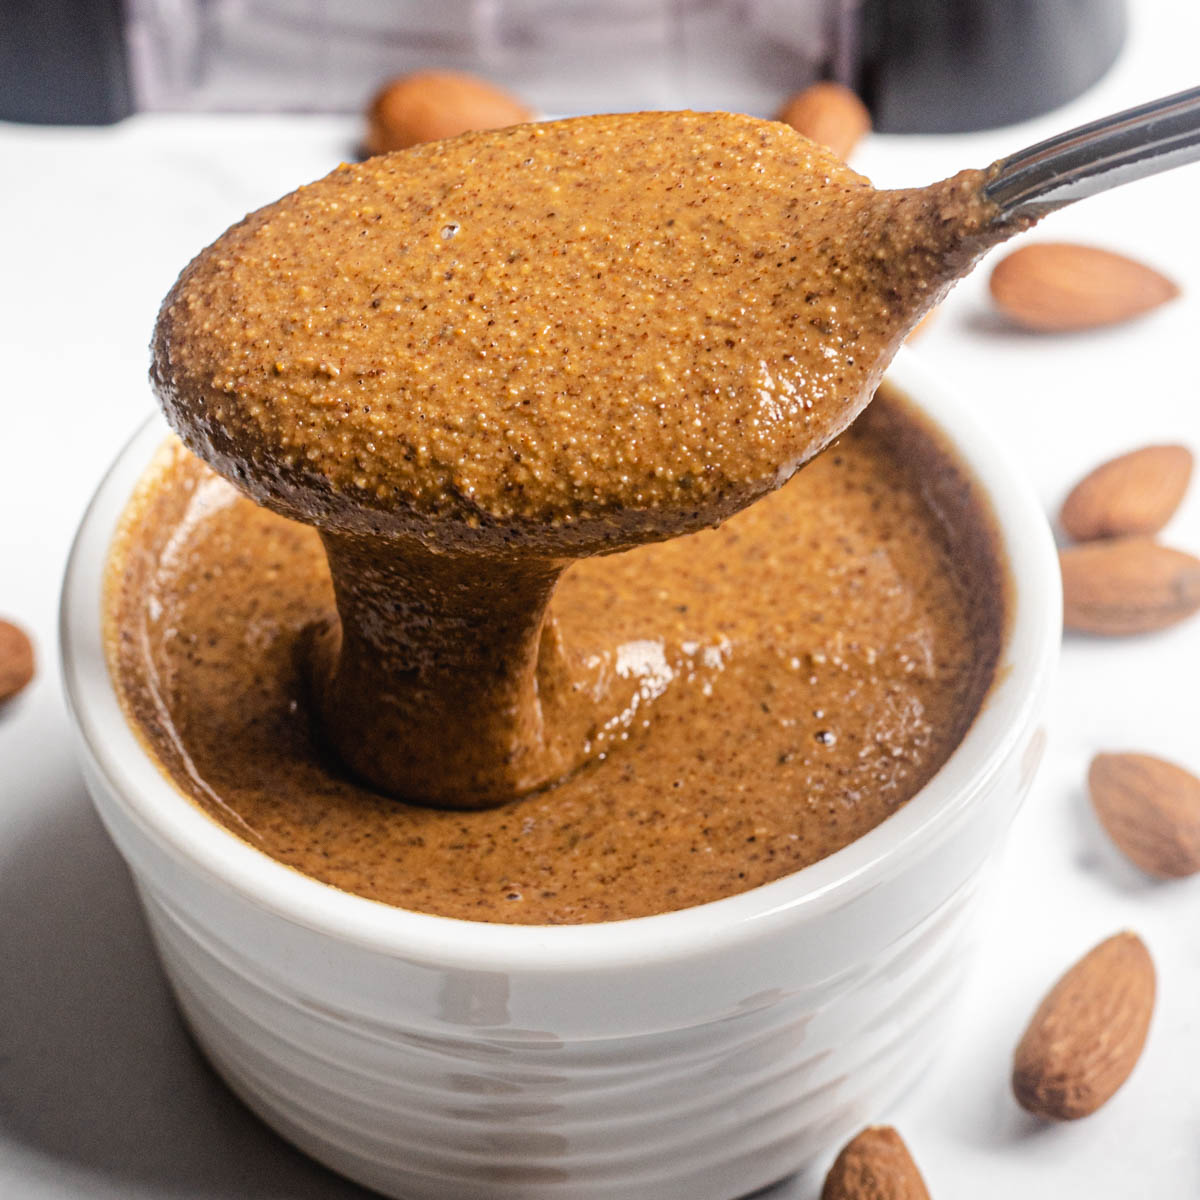 How to make almond butter in a blender